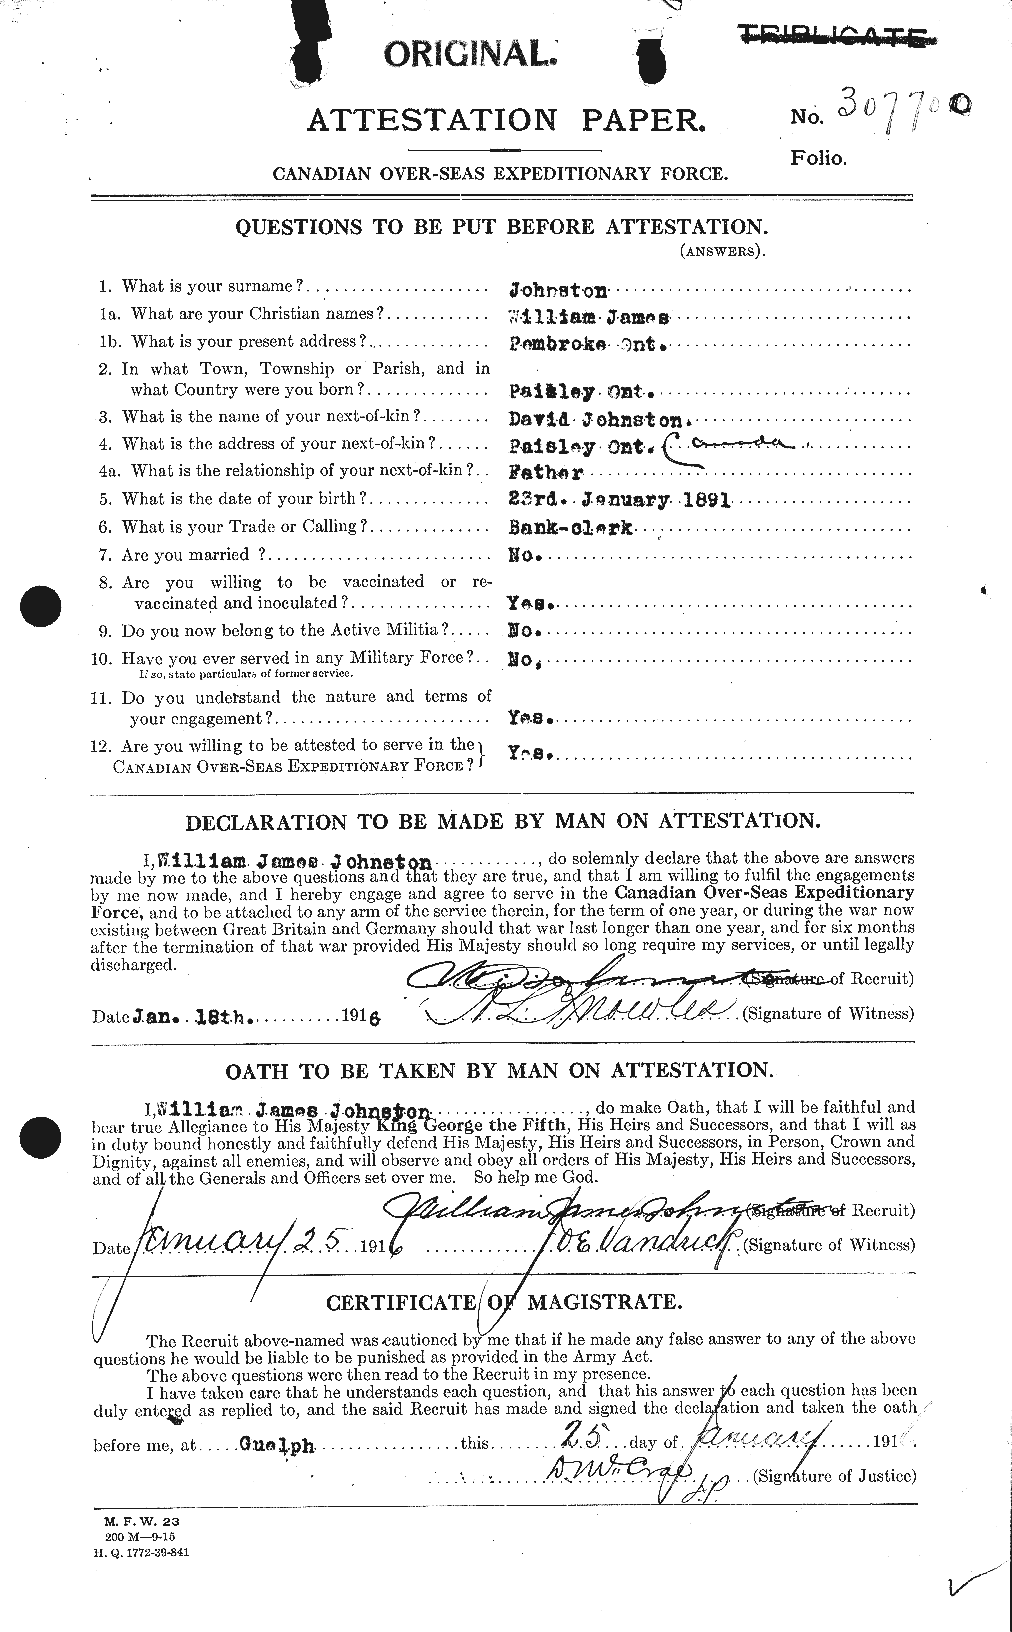 Personnel Records of the First World War - CEF 427356a